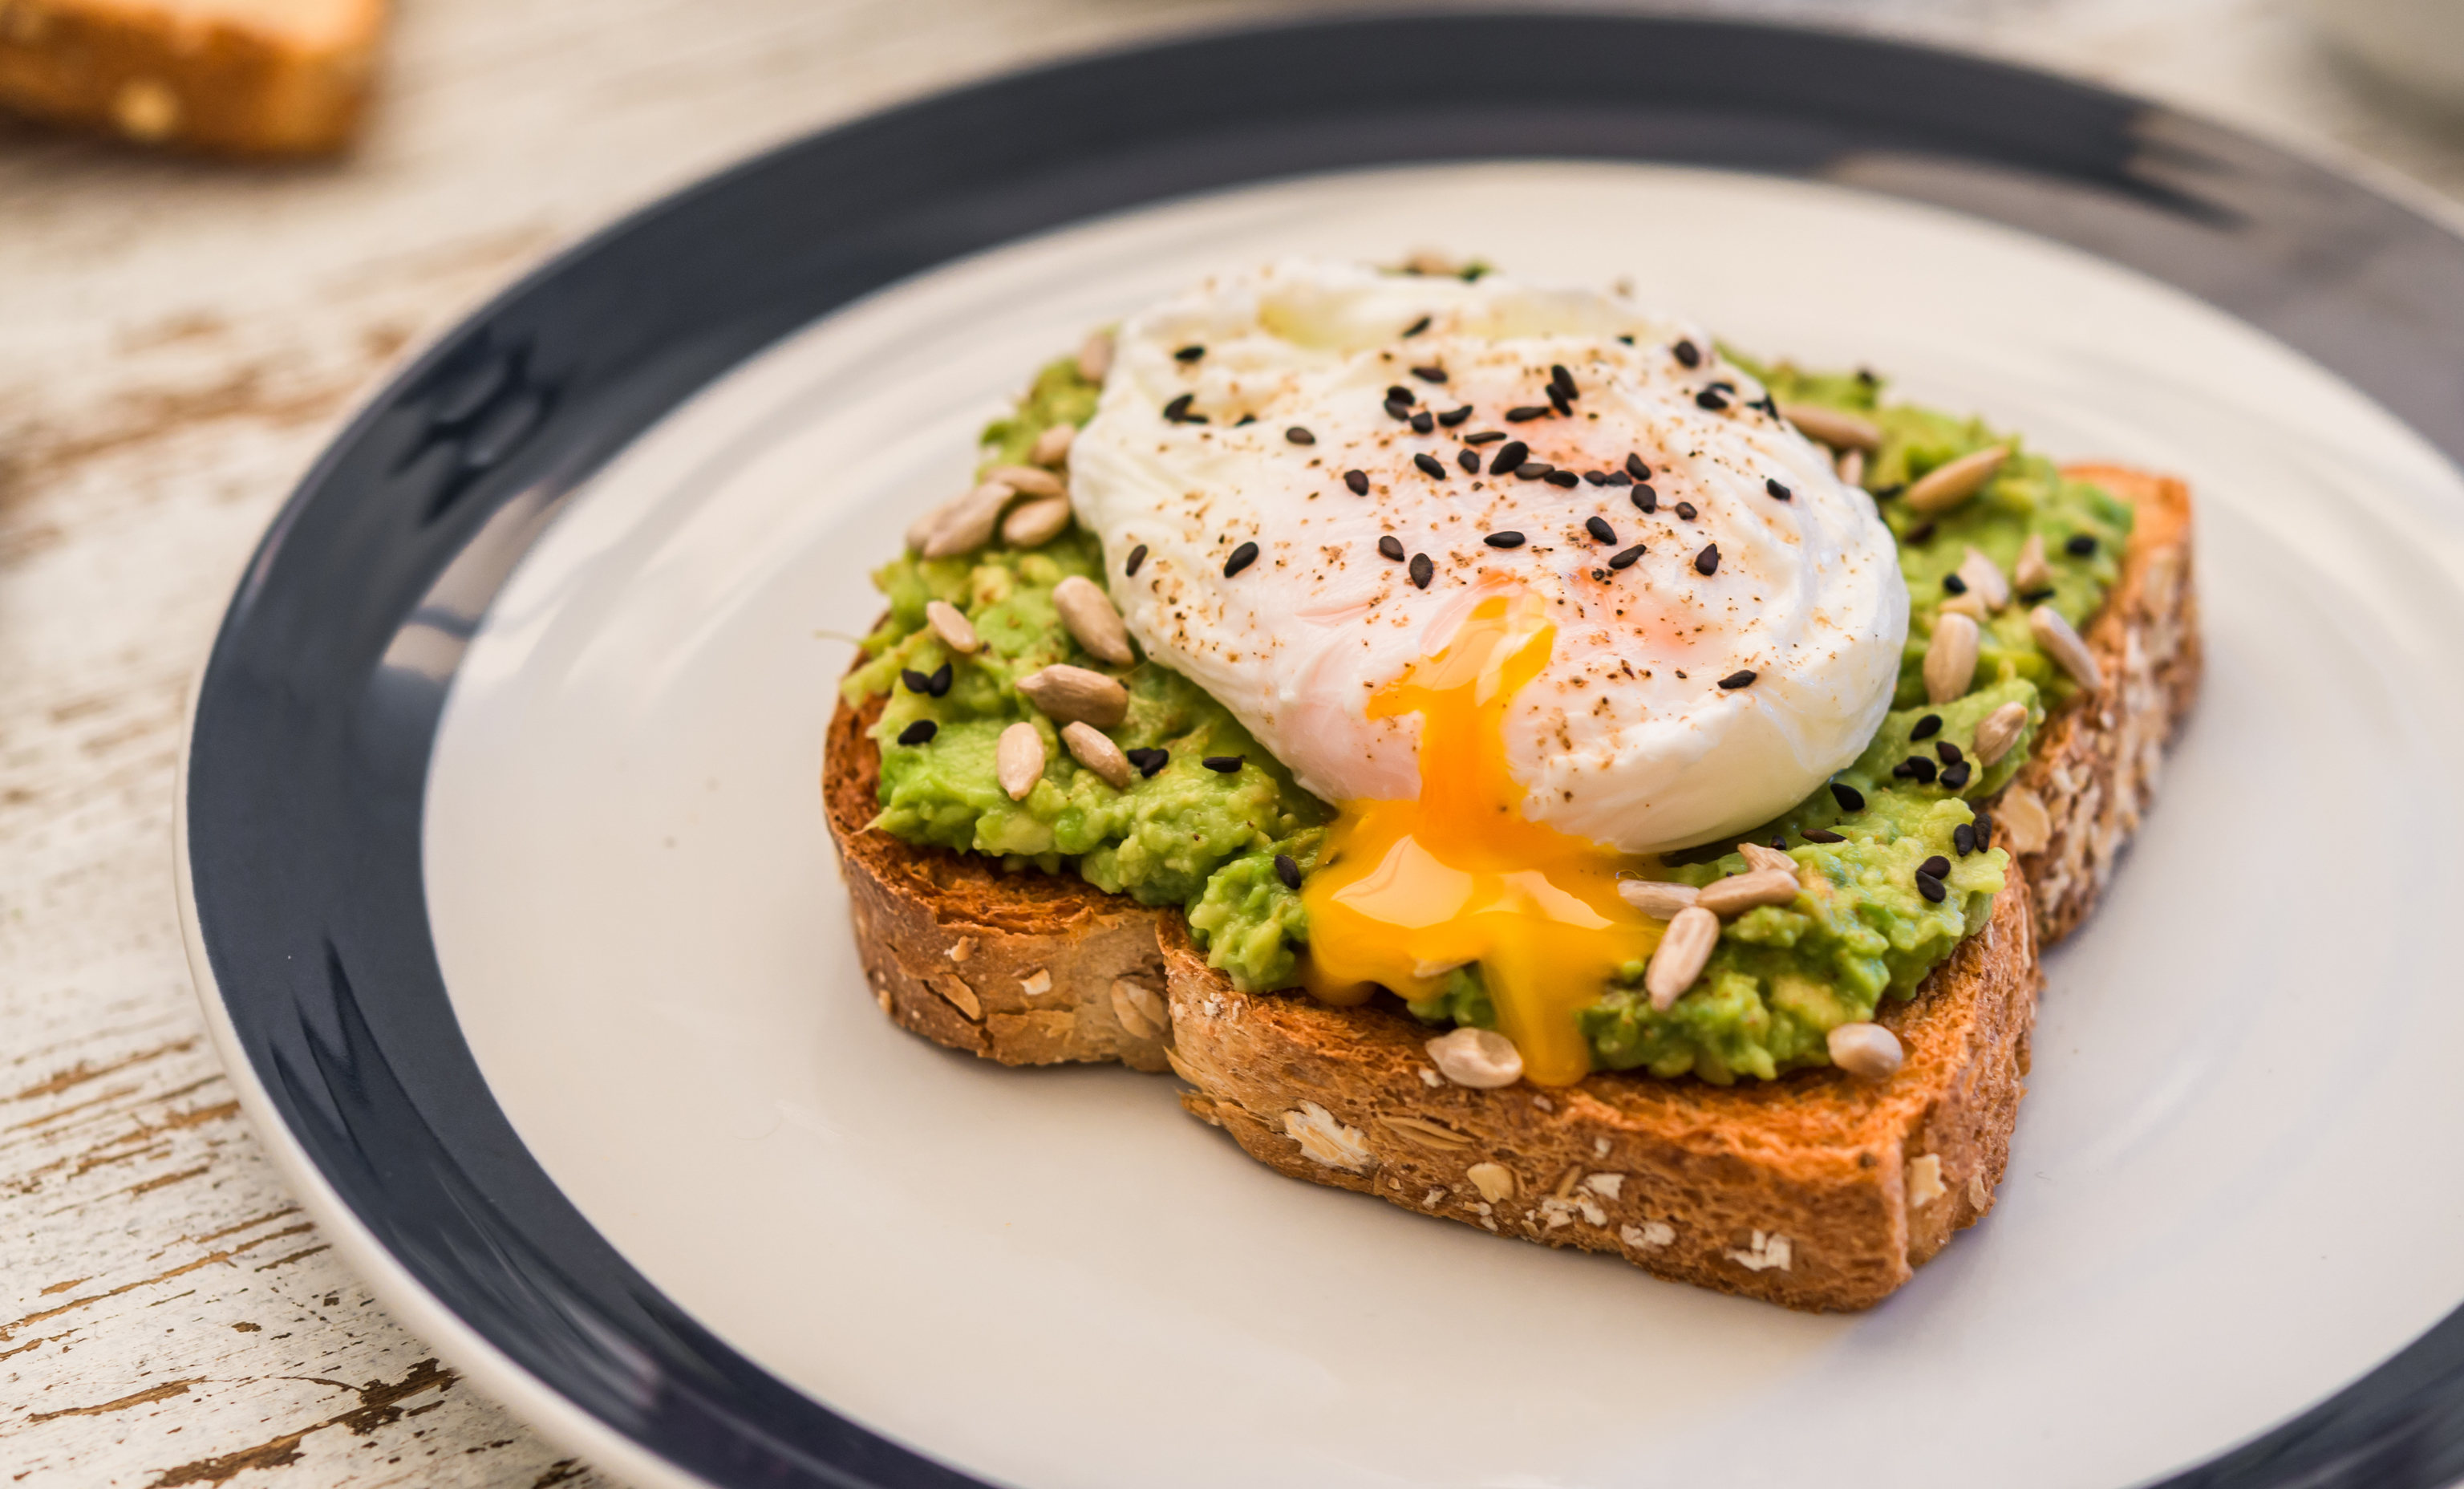 Avocado and poached egg on toast.